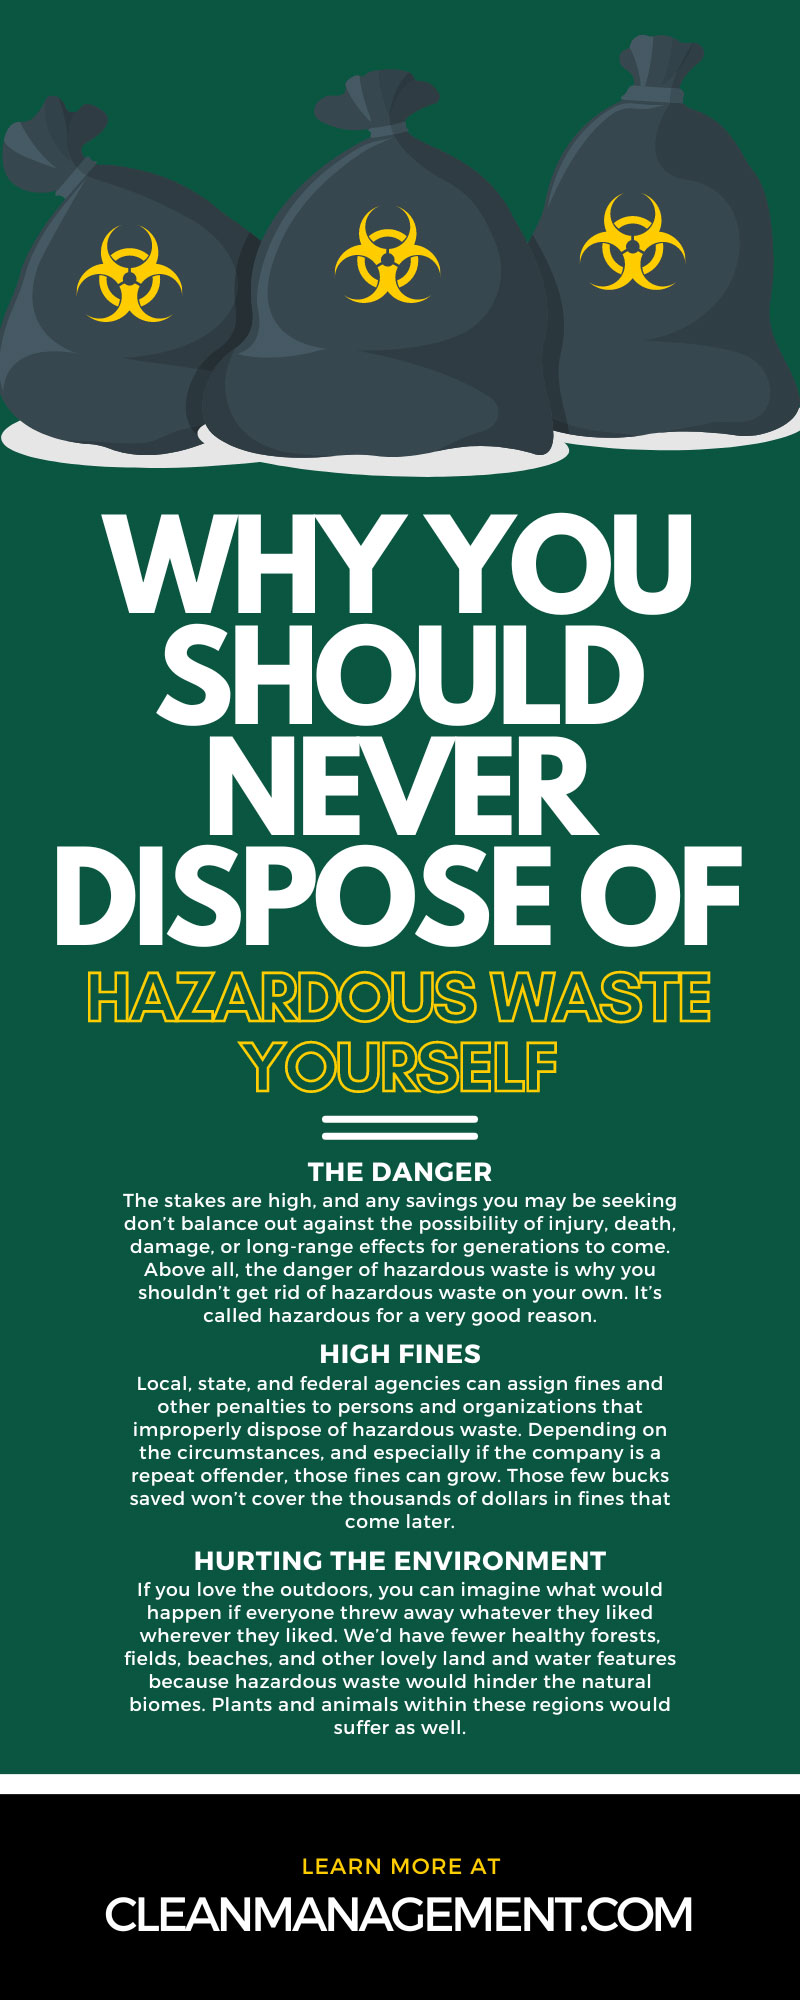 Why You Should Never Dispose of Hazardous Waste Yourself